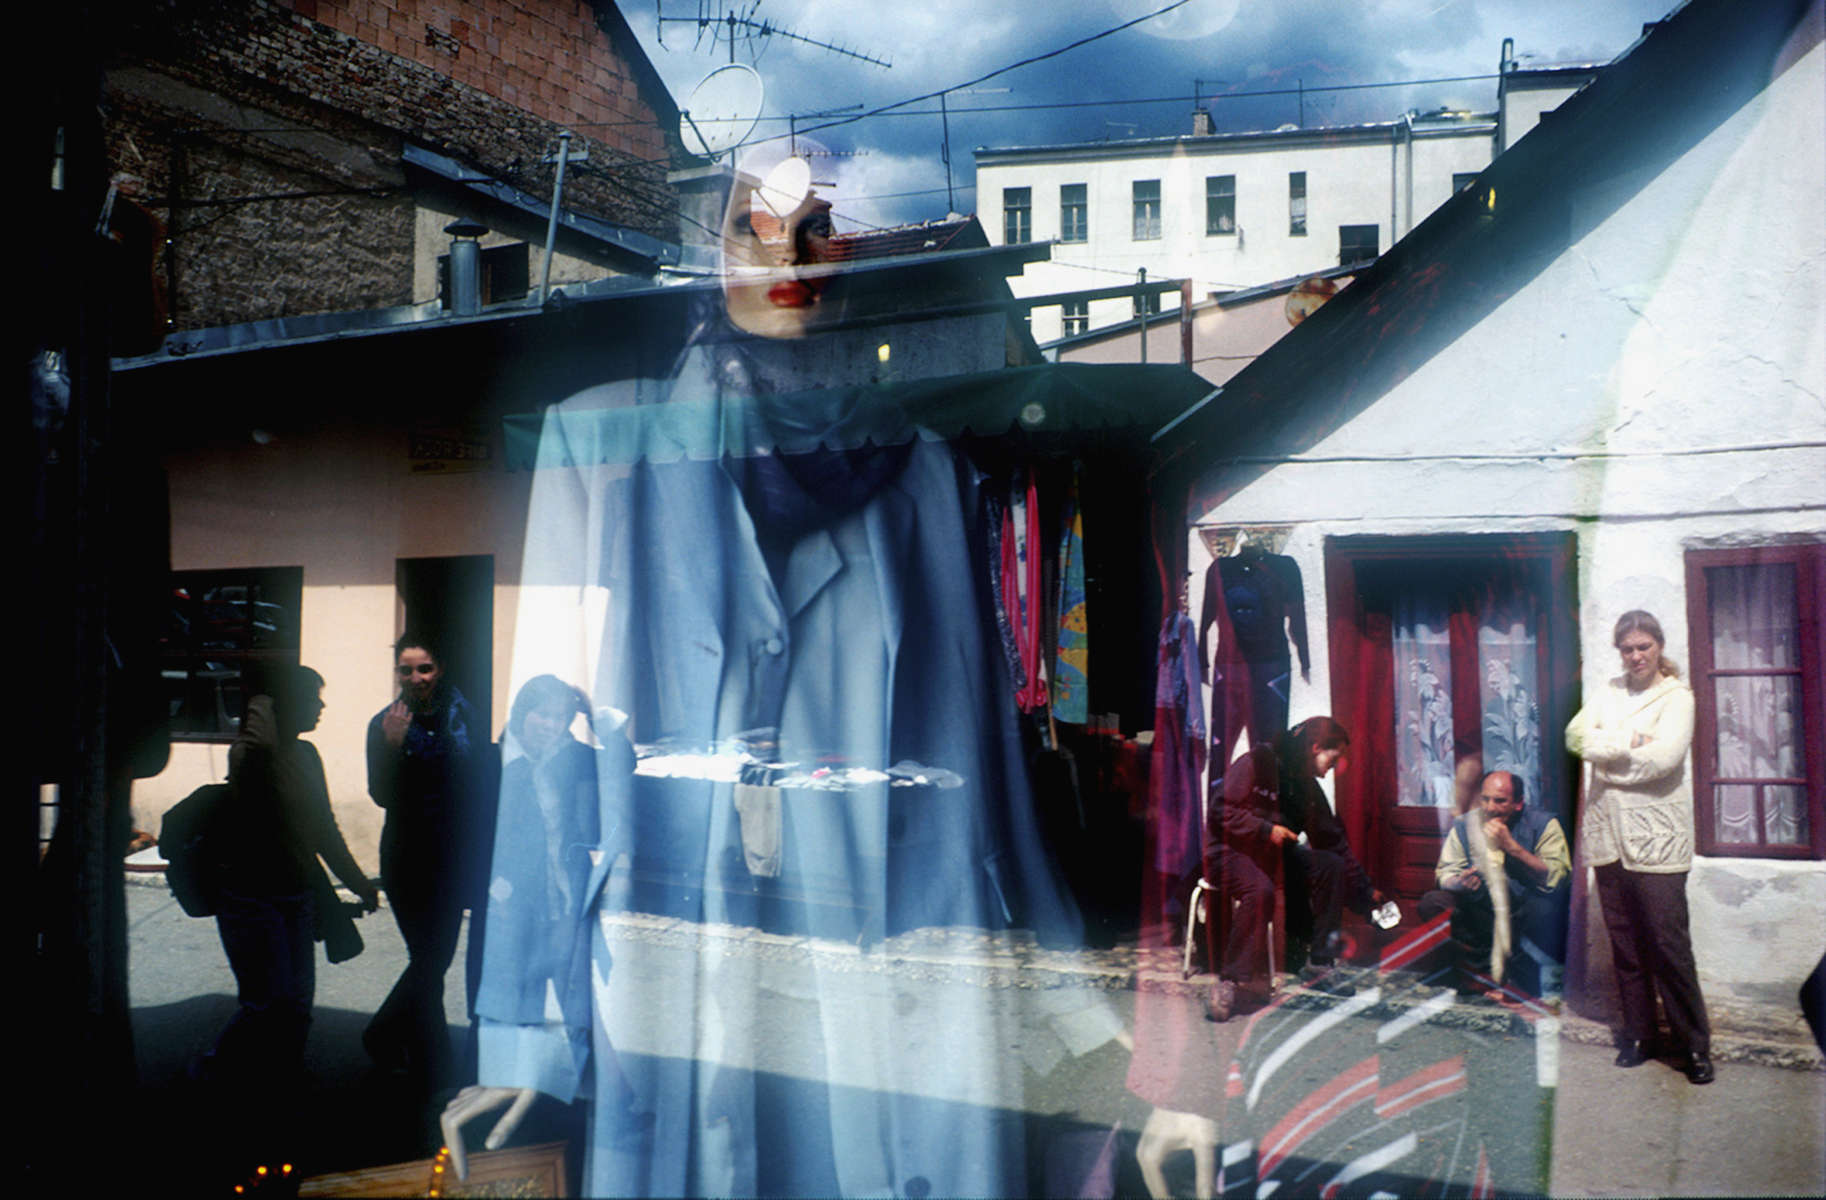 A scarved mannequin in bacarsija, the old town area of Sarajevo, is a reflection of the increased interest in Islam among many Bosnian Muslims after the war. April 2002.